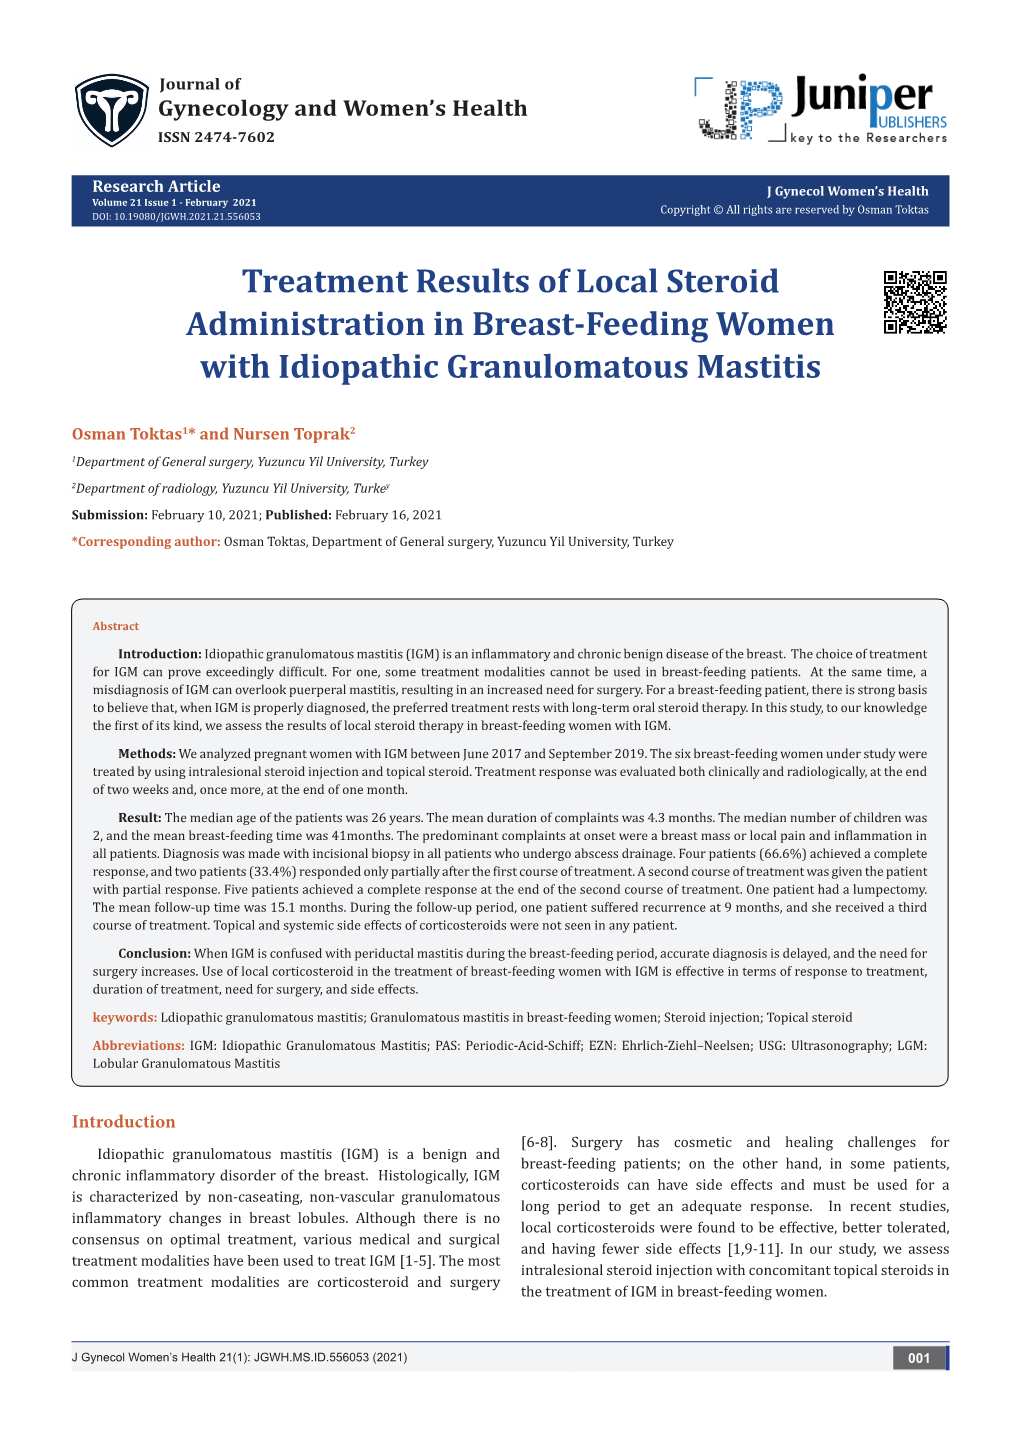 Treatment Results of Local Steroid Administration in Breast-Feeding Women with Idiopathic Granulomatous Mastitis